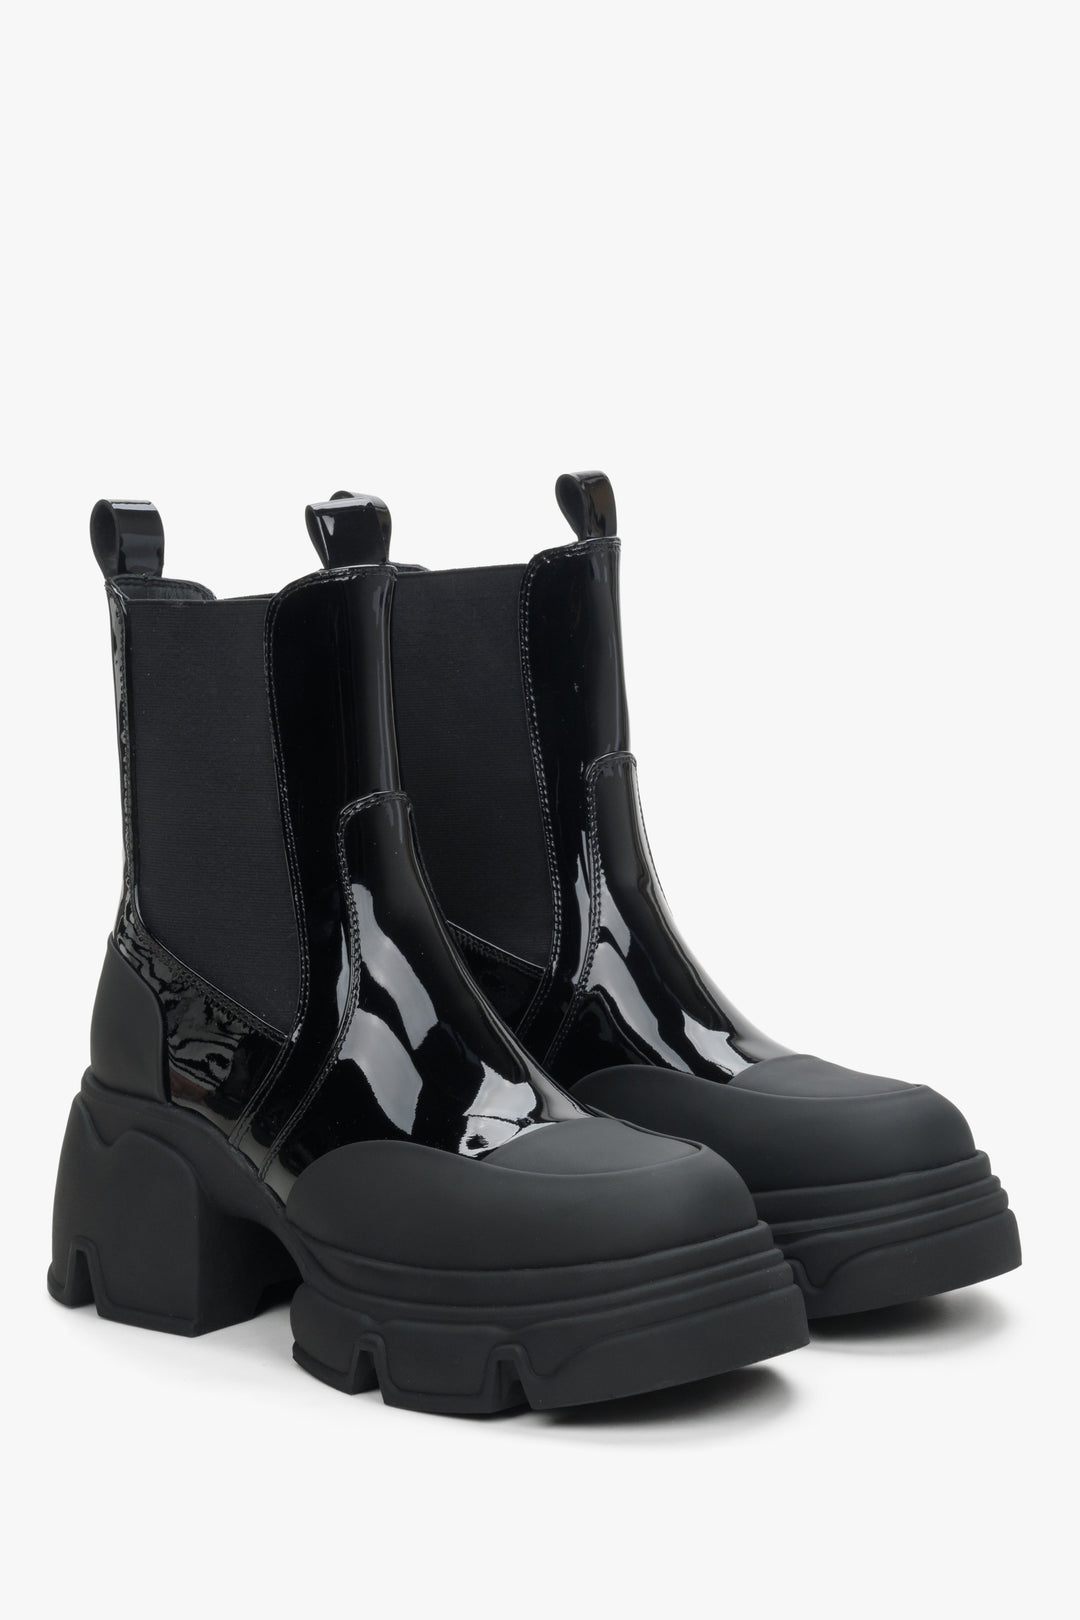 Women's leather Chelsea boots on a platform by Estro.